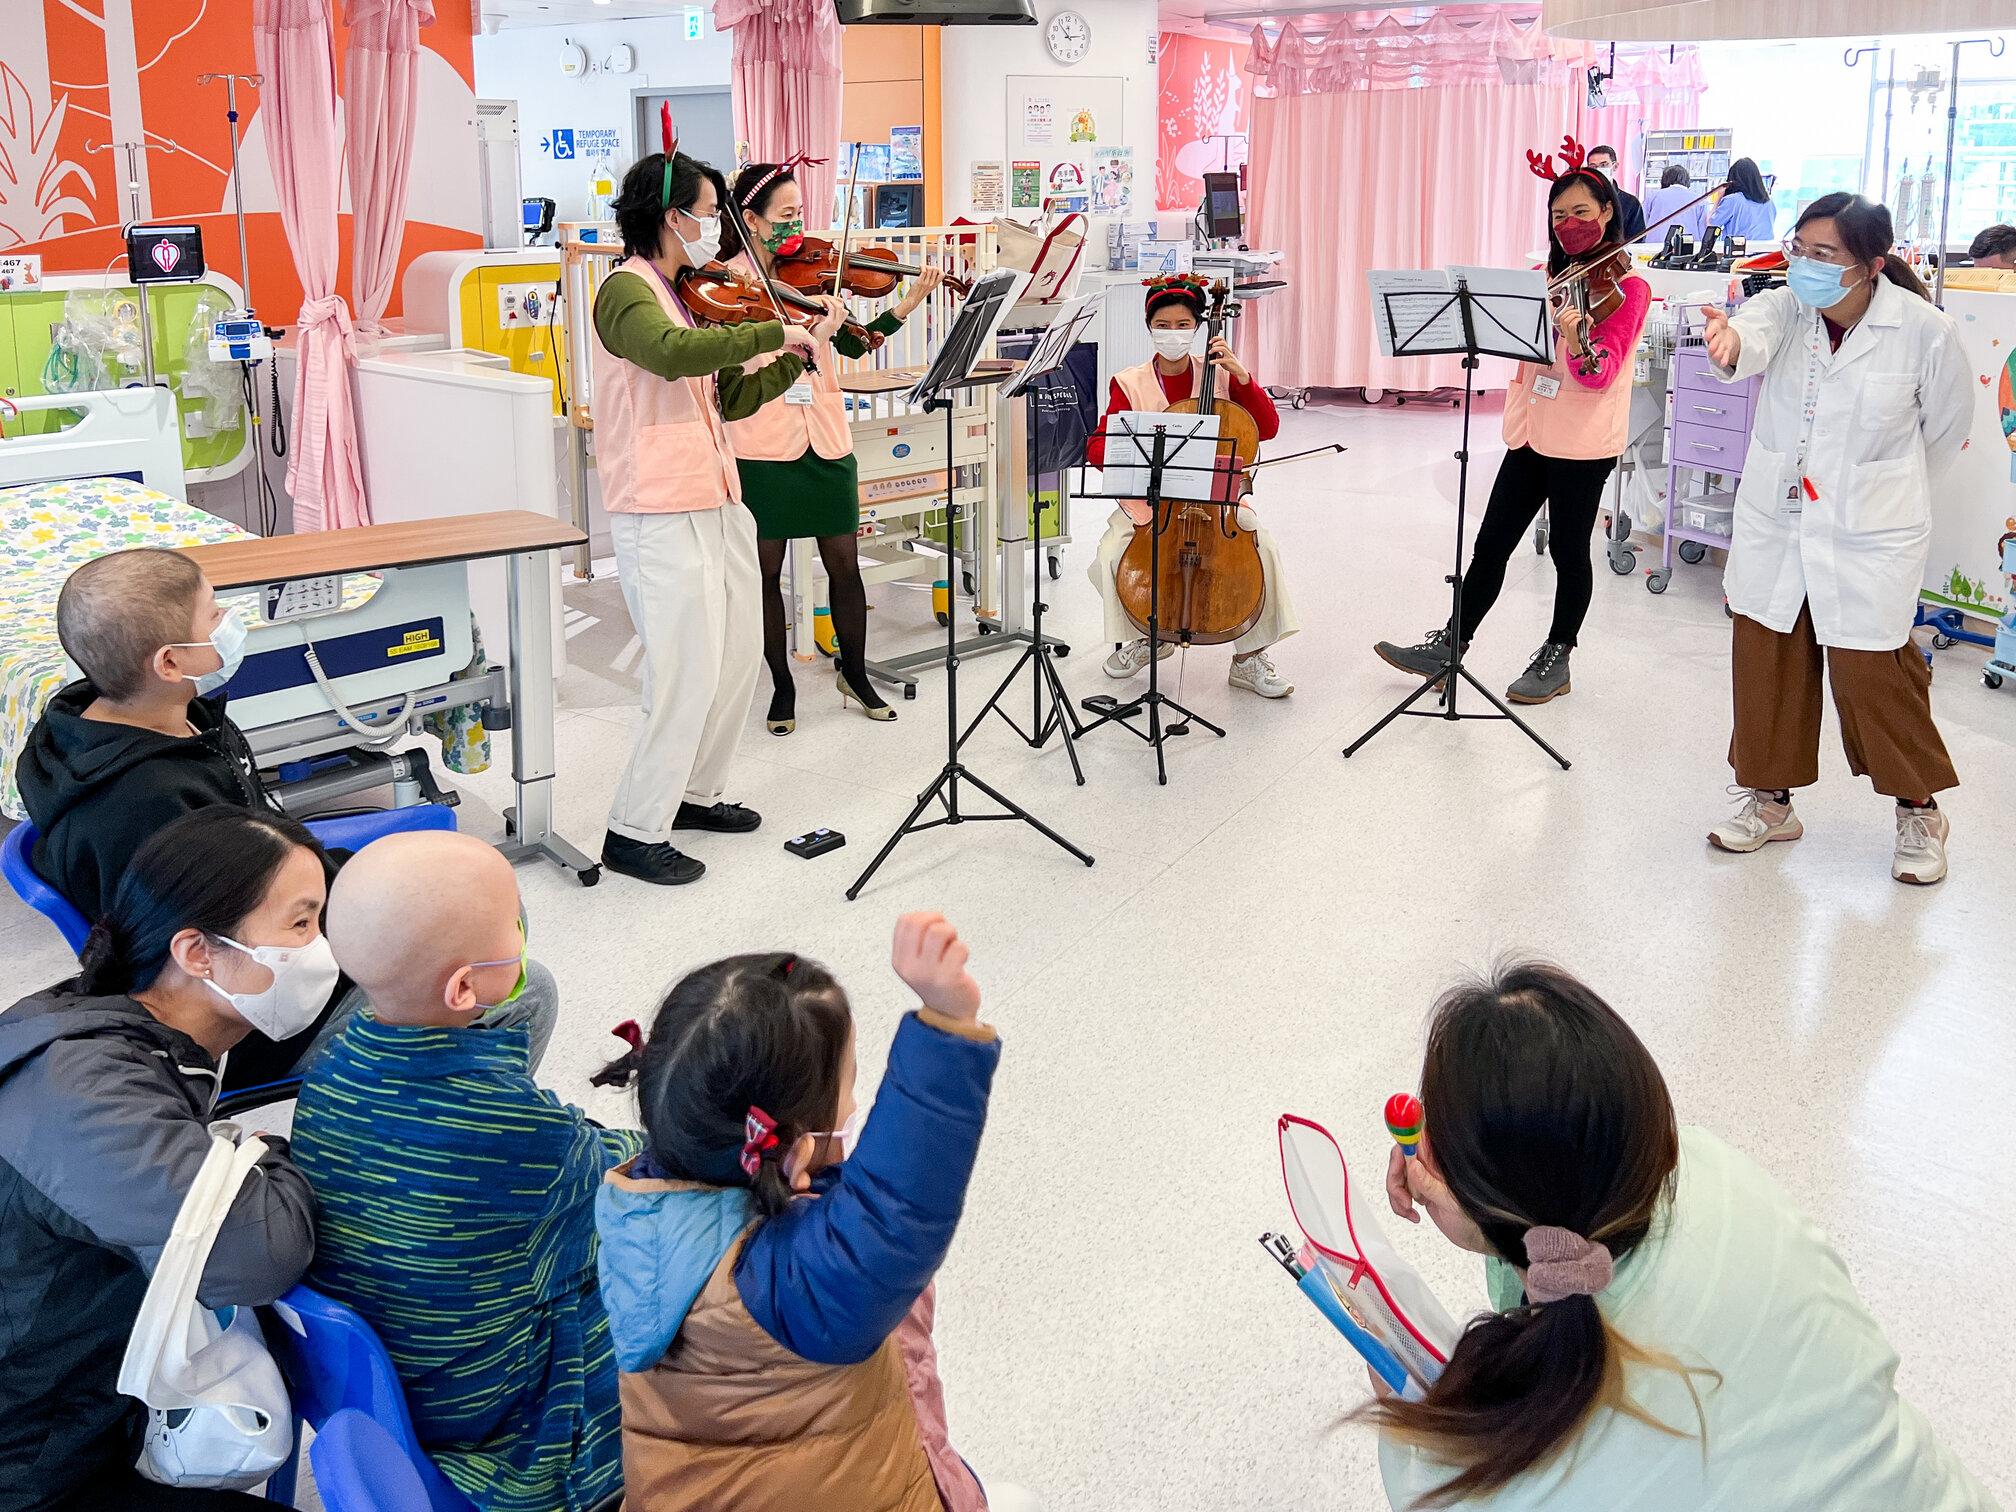 The Hong Kong Children's Hospital arranged some volunteers who are professional musicians to perform in wards. Children and parents delightfully immersed themselves in joyful festive music.
